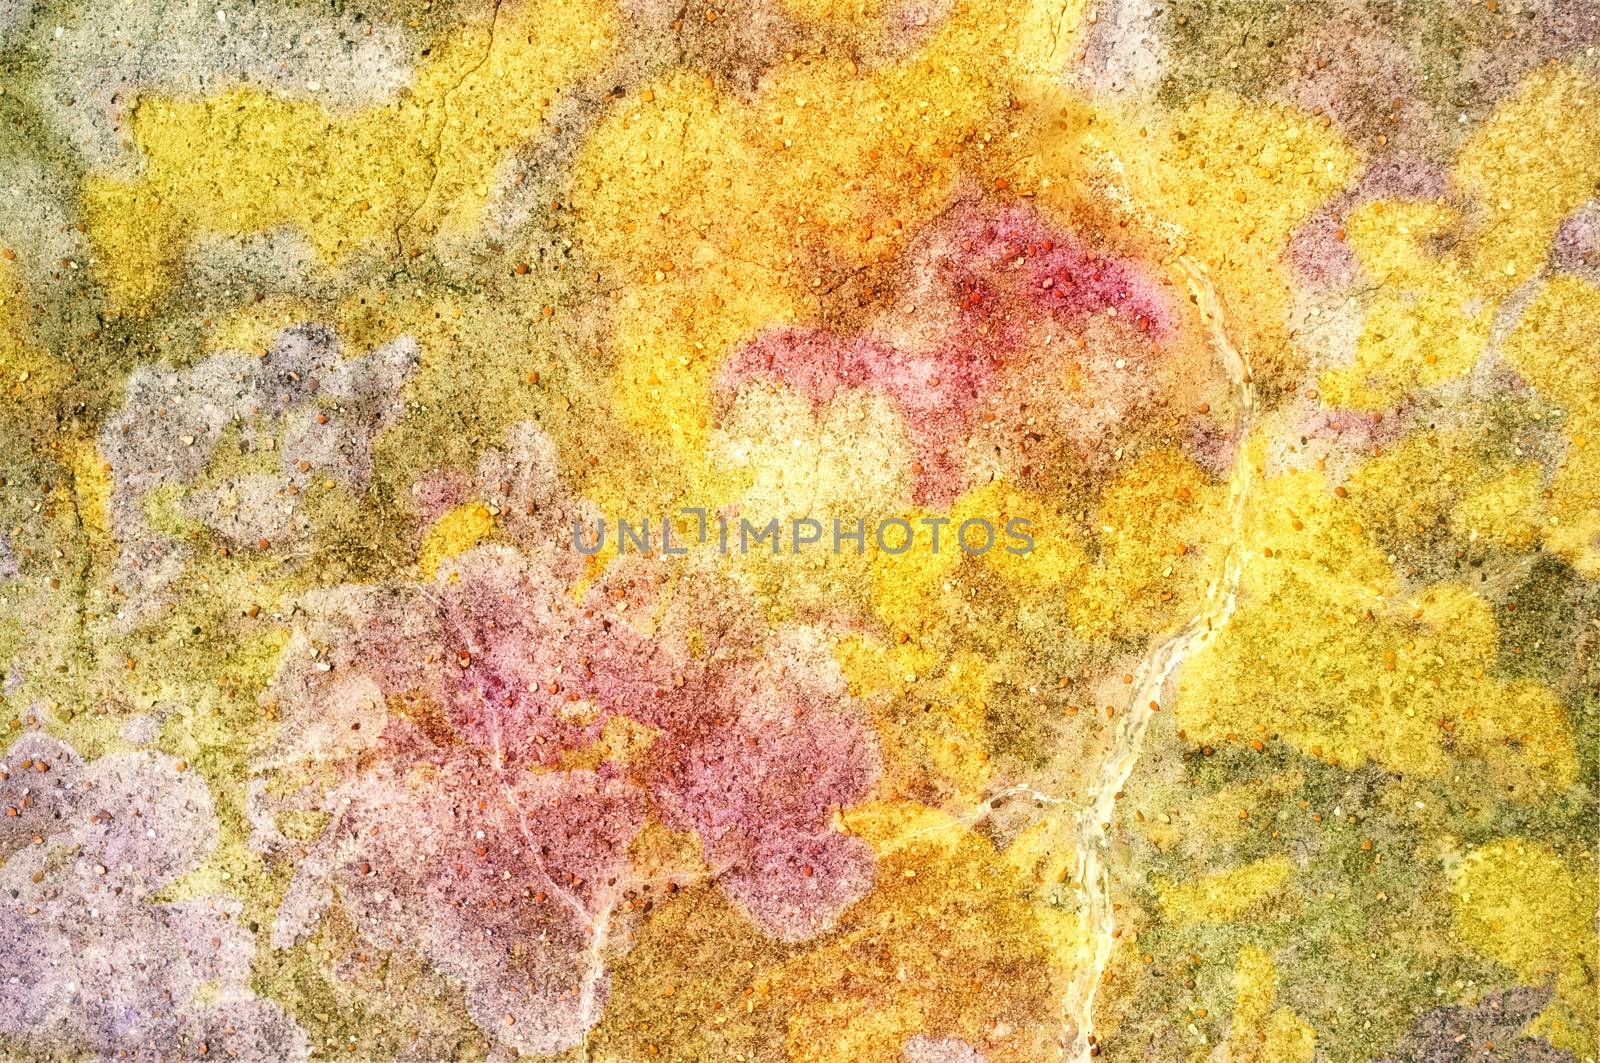 Abstract background texture of a piece of stone, scattered with smaller stones and overlaid with bright yellow, pink and green hues.